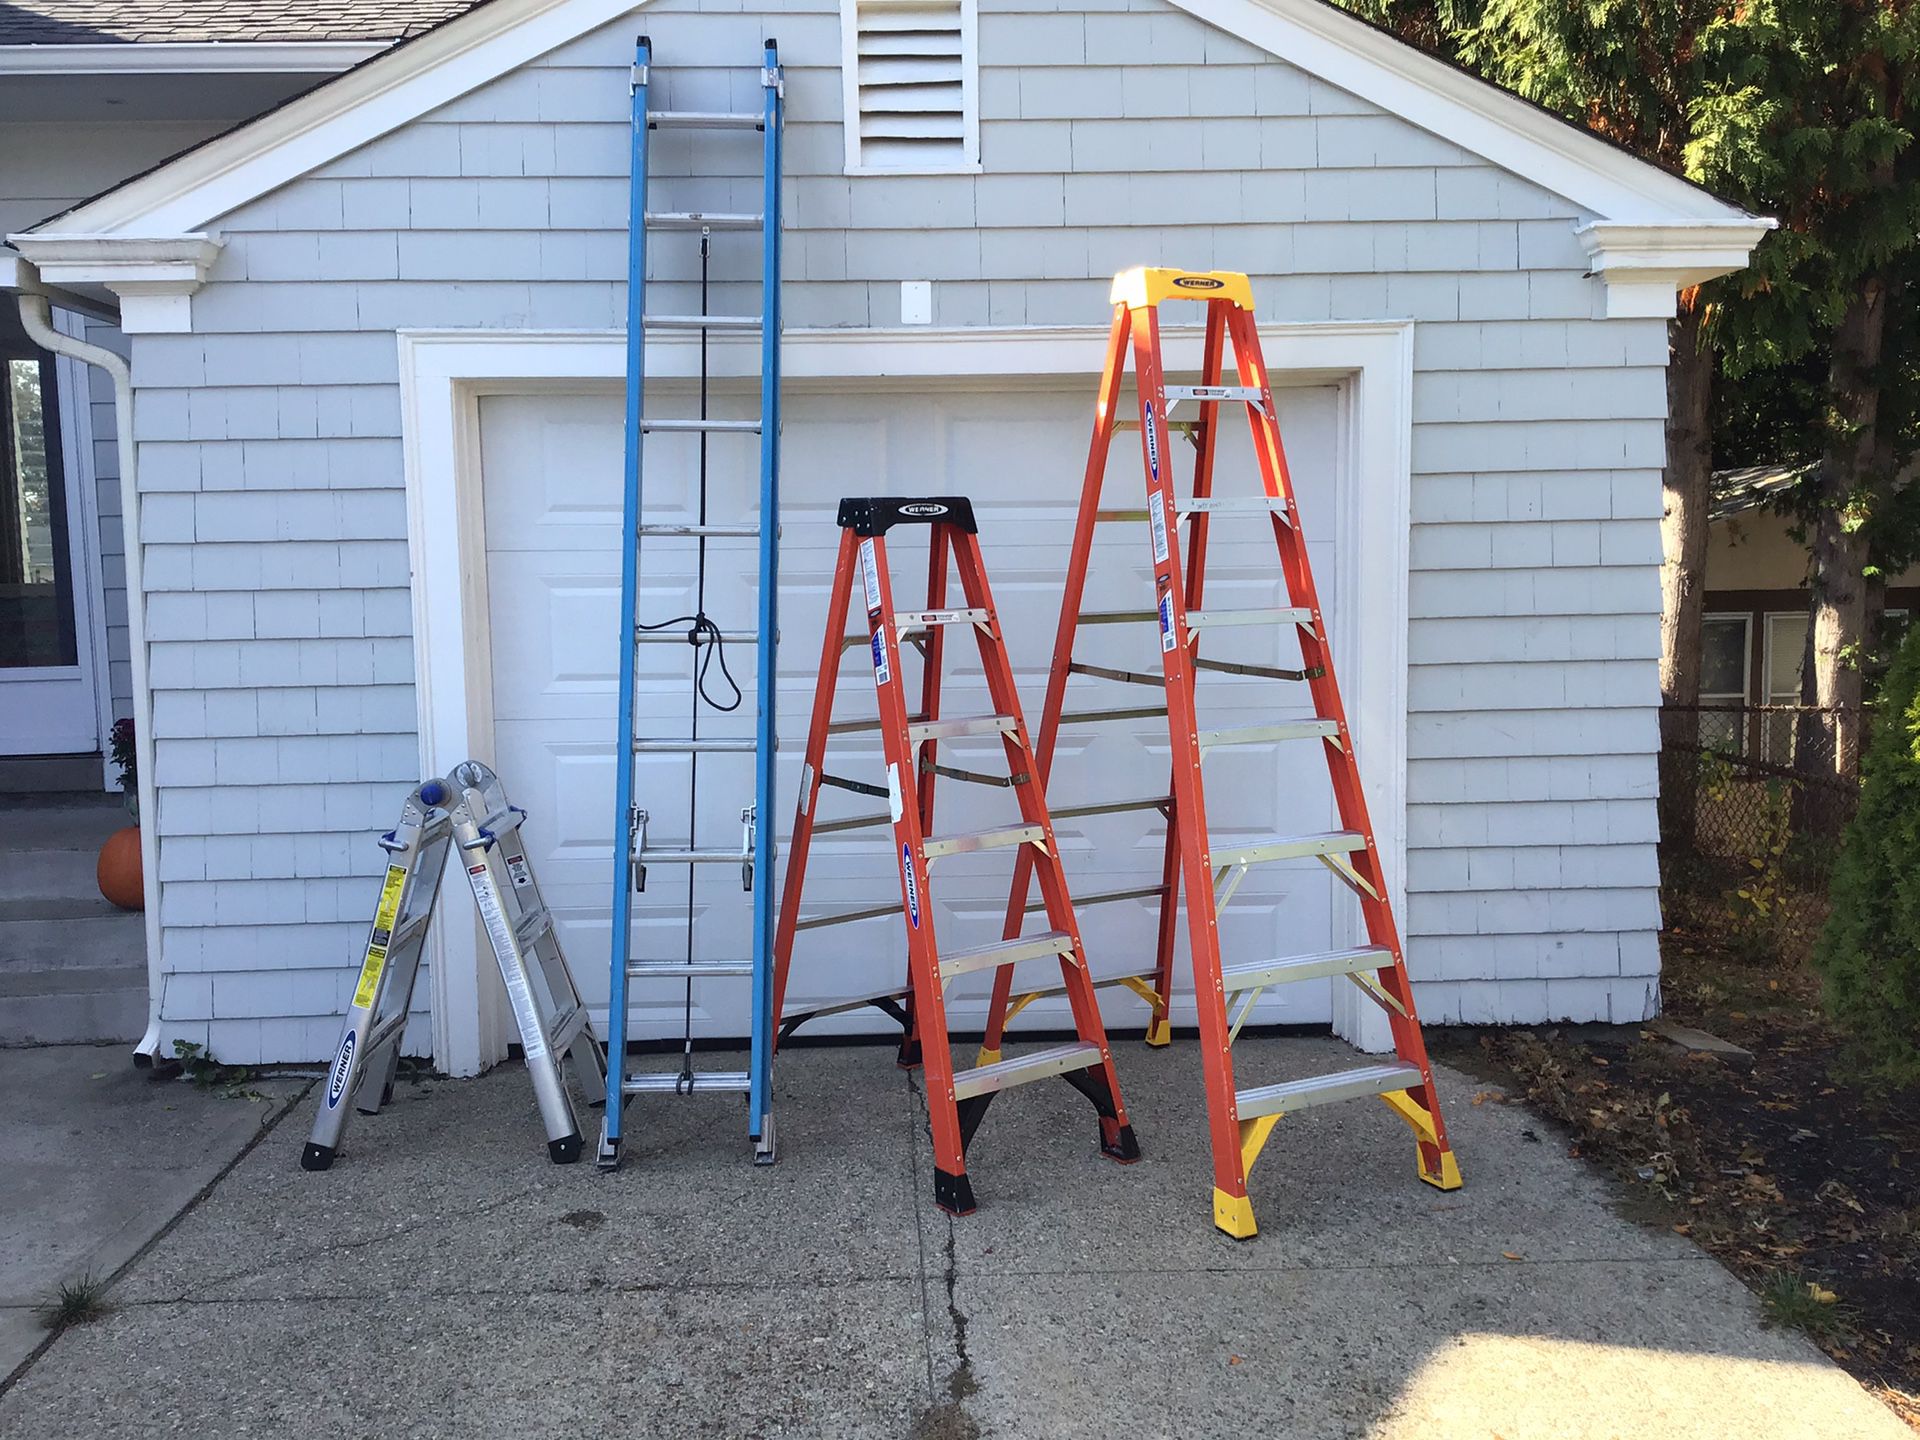 First and third ladders remain for sale. 75 dollars must take both. Cash only please.